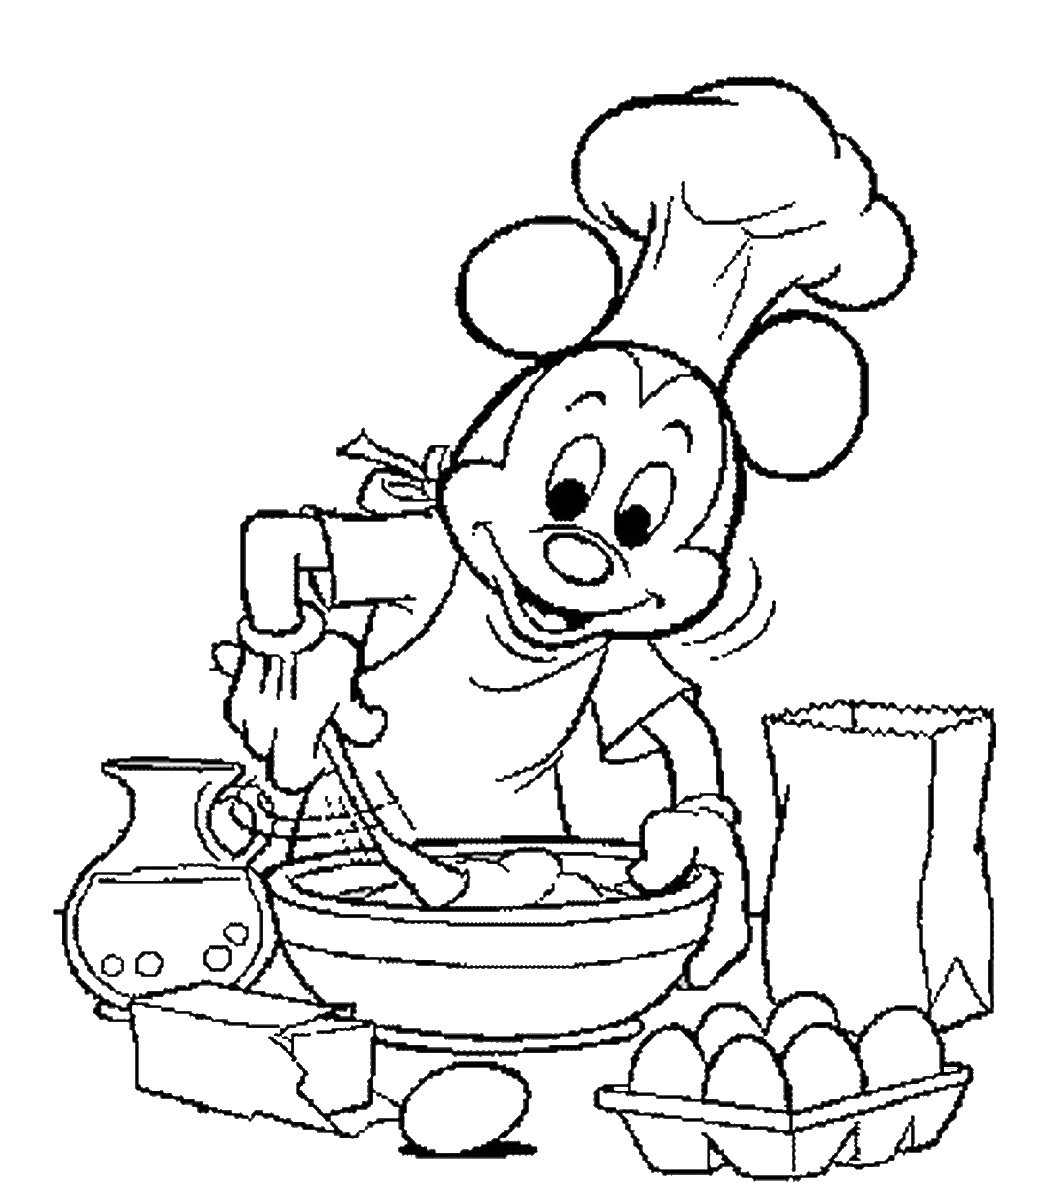 Cooking Coloring Book For Kids
 Cooking & Baking Coloring Pages